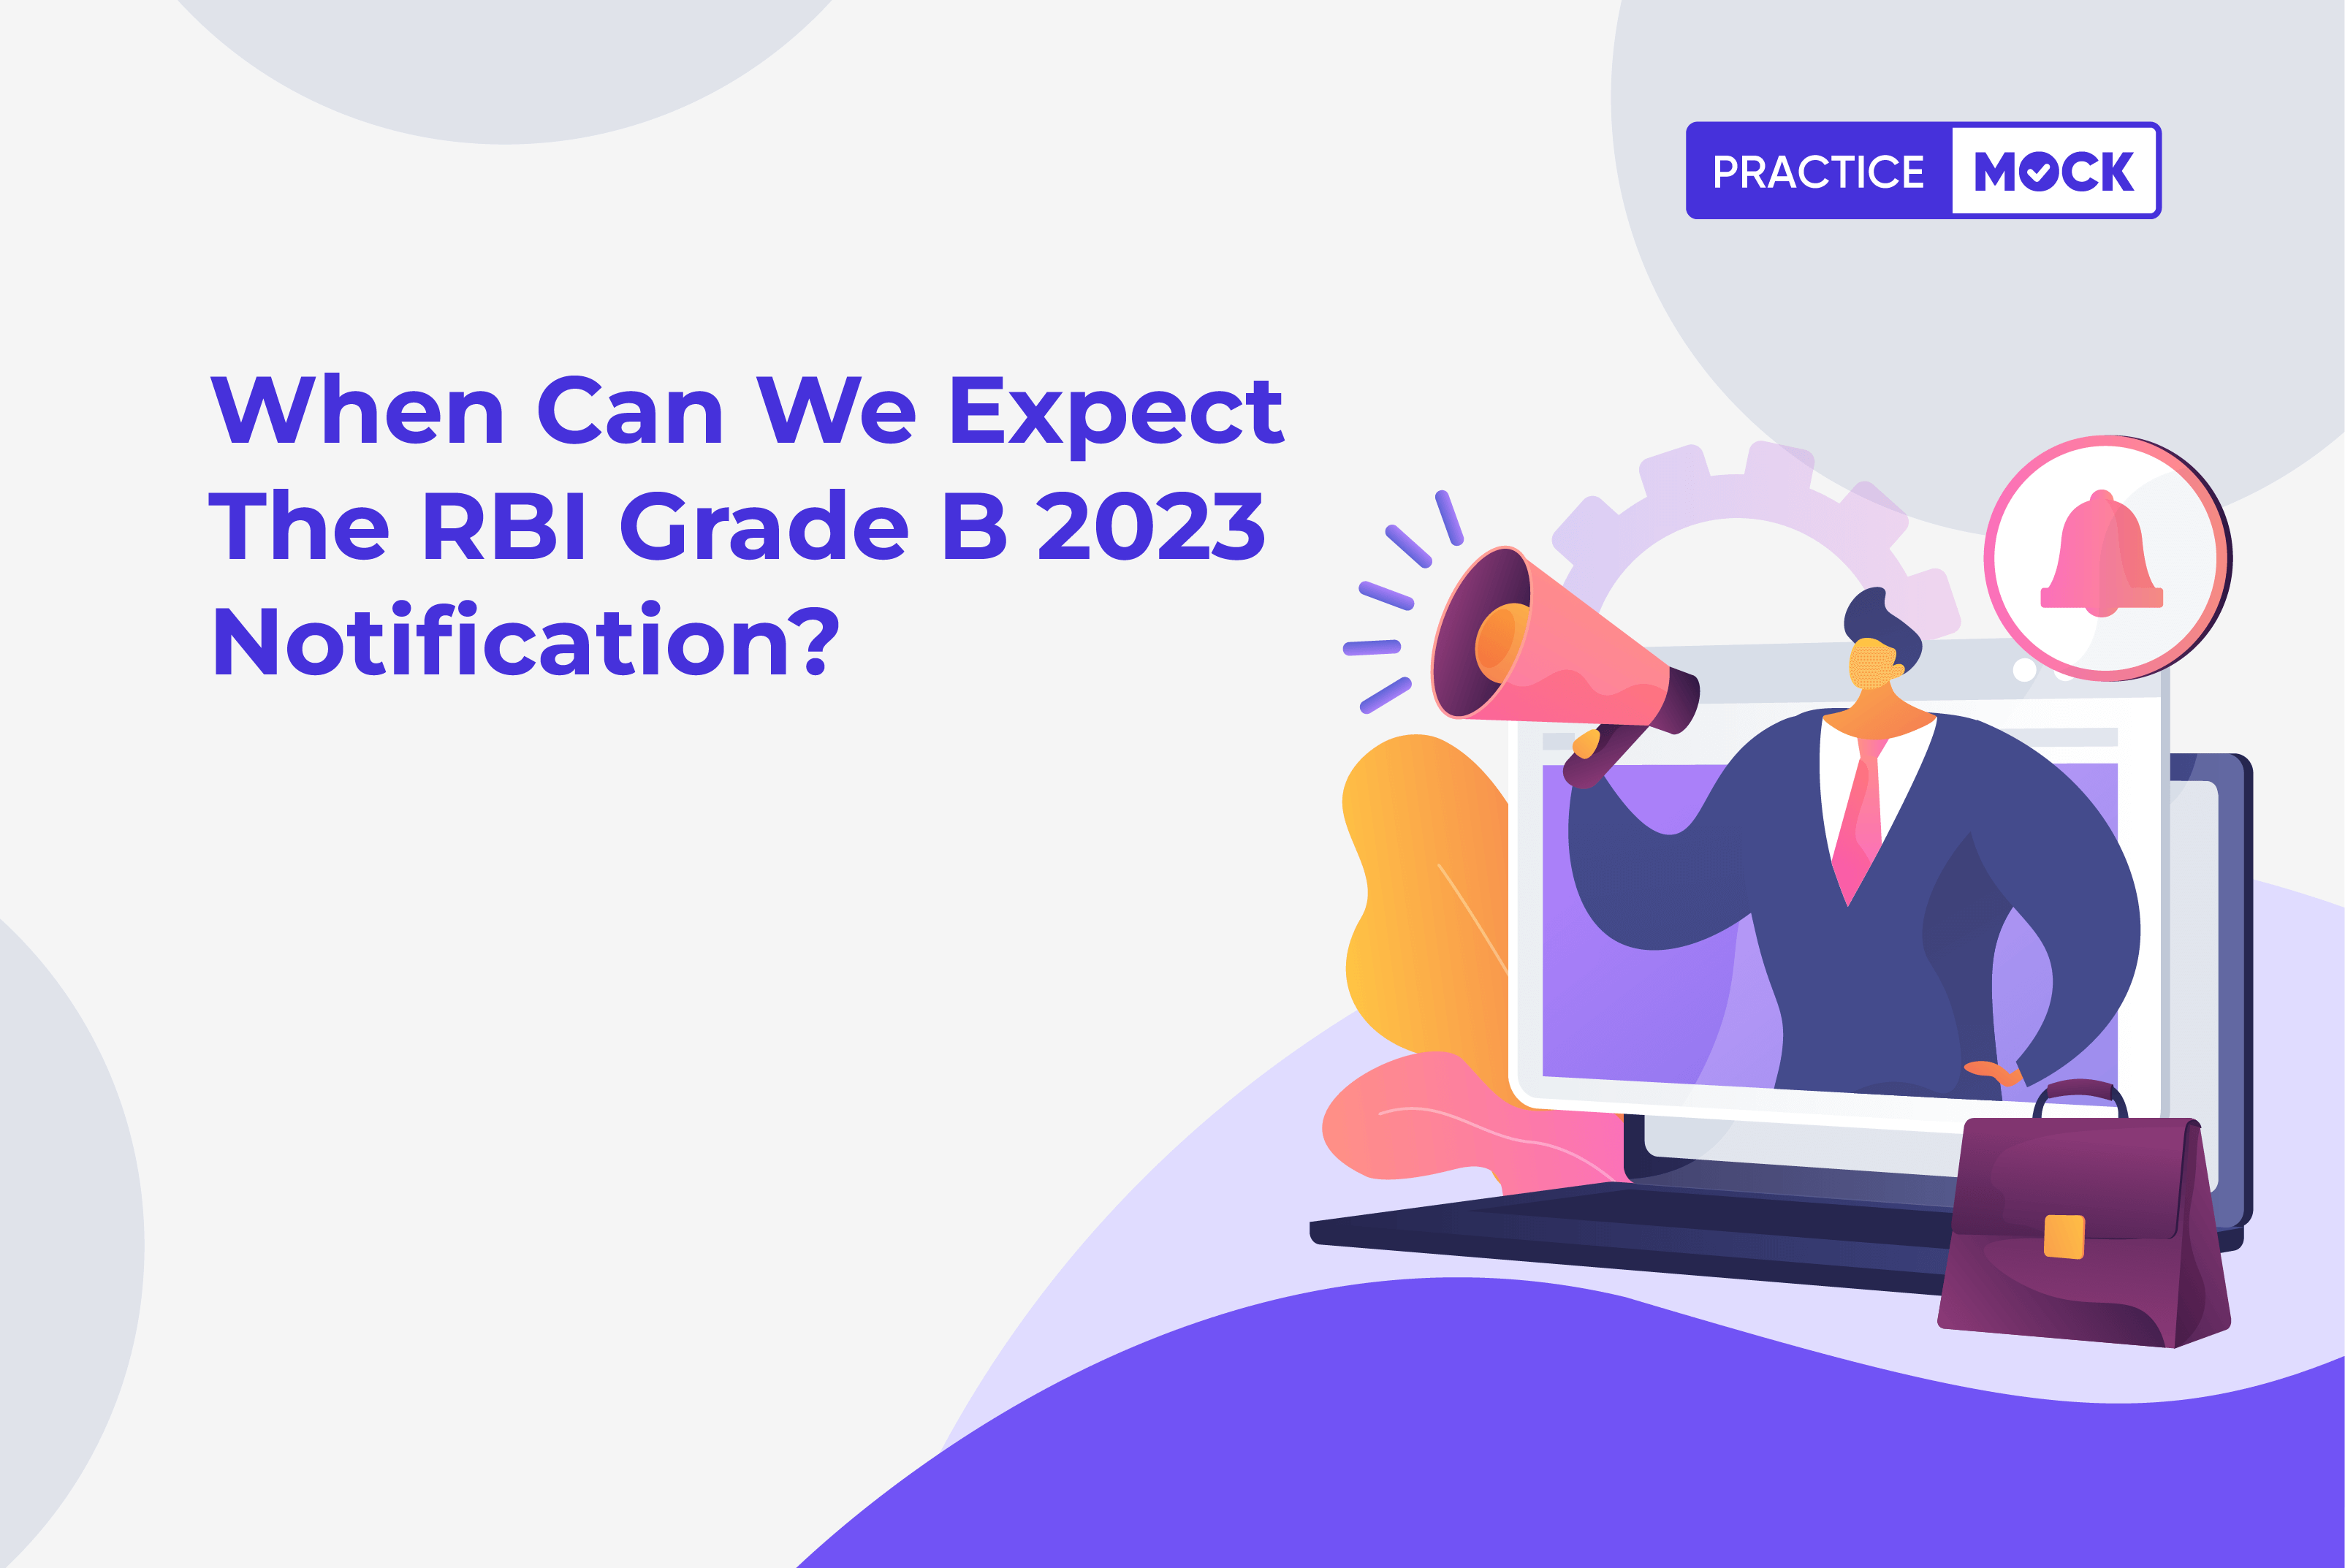 When can we expect the RBI grade B 2023 notification?